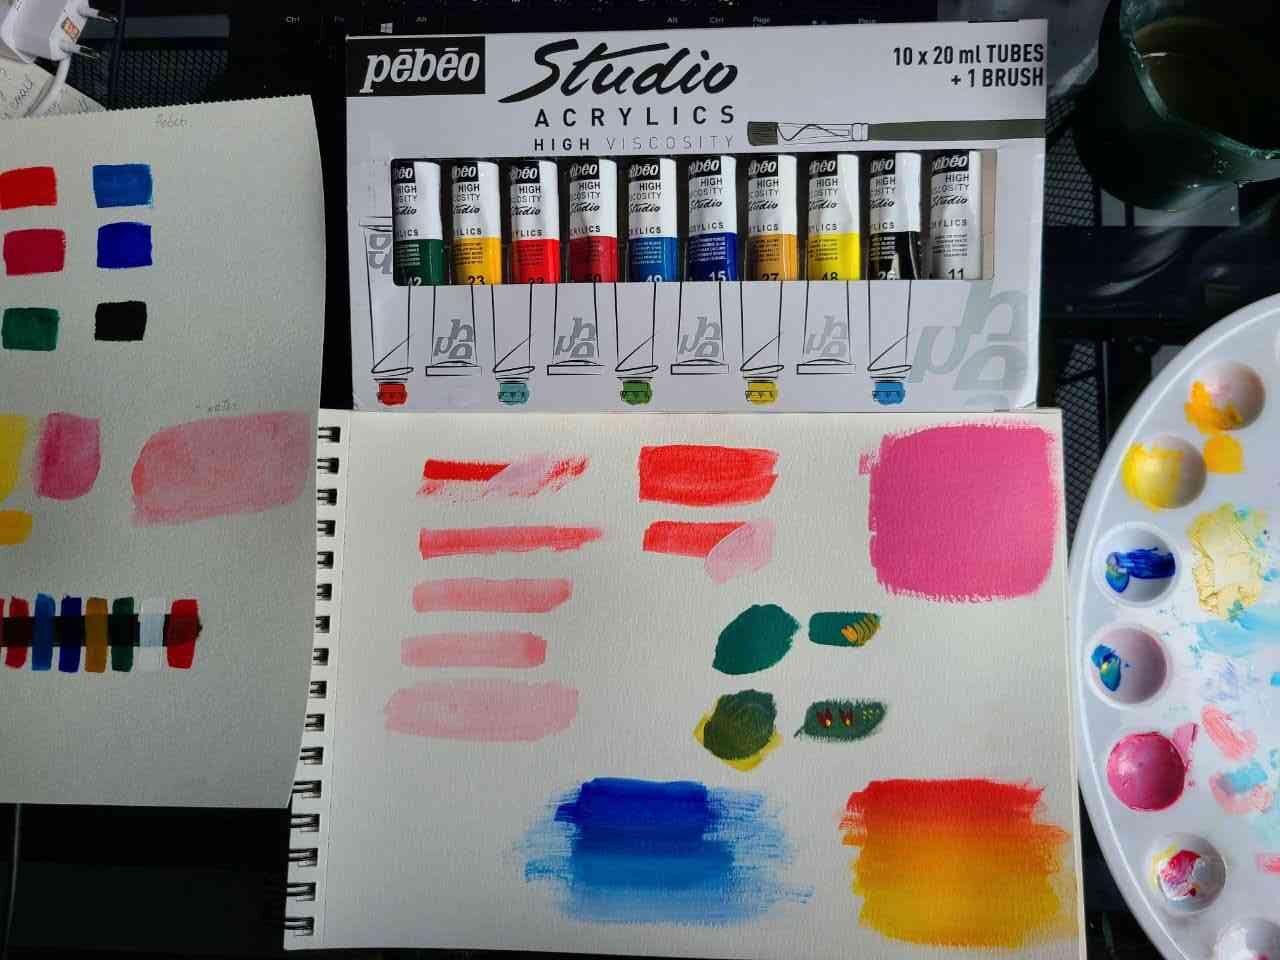 How to use Pebeo acrylic paint